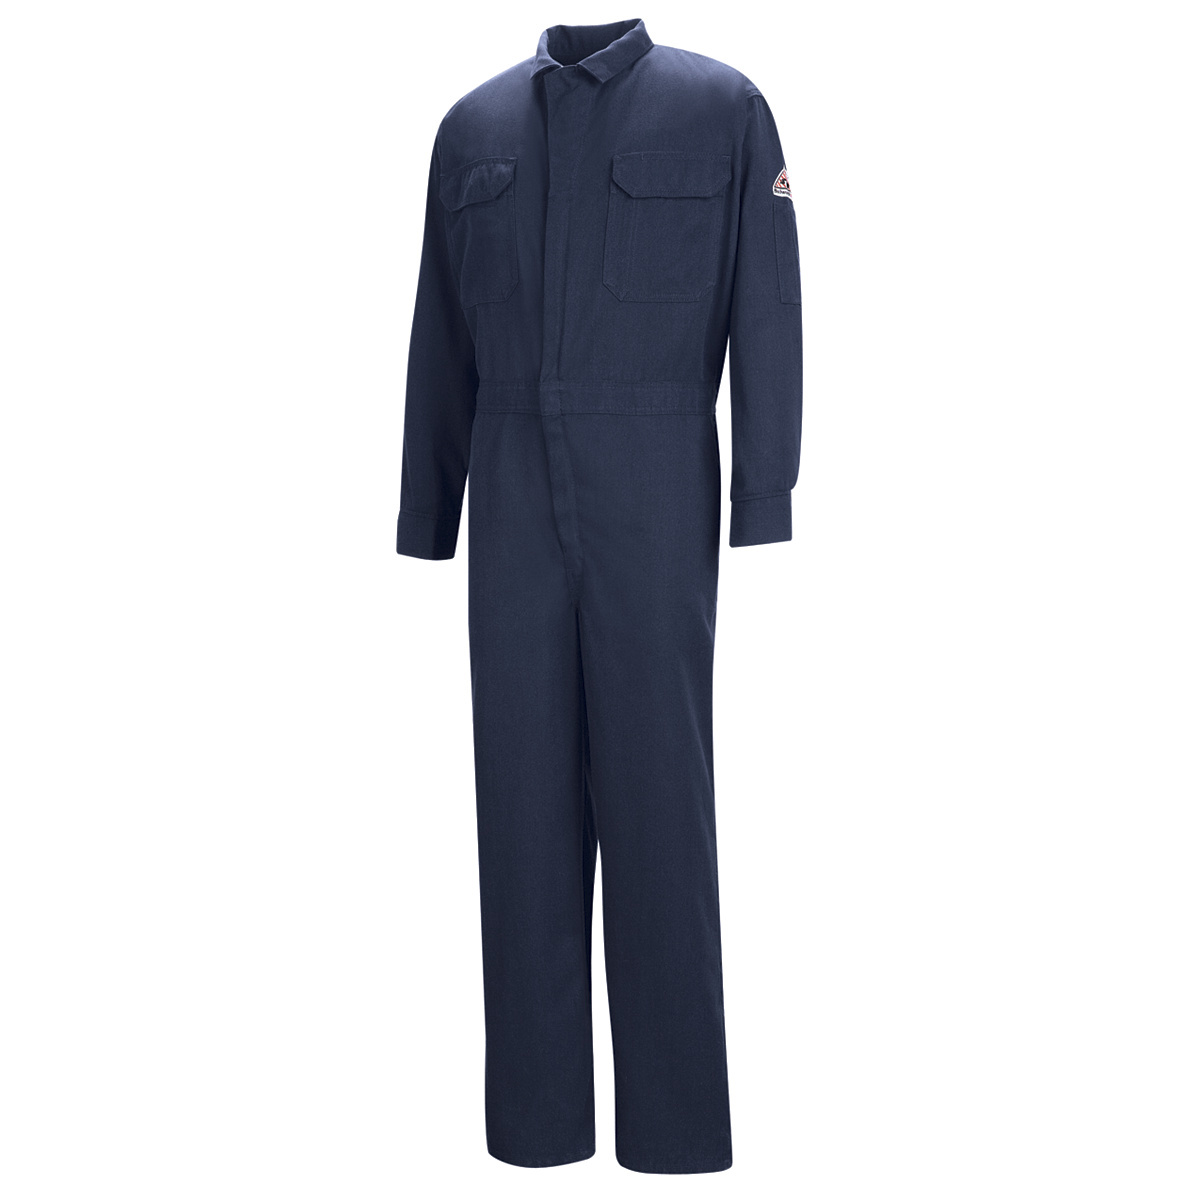 Bulwark® 42 Tall Navy Blue Modacrylic/Lyocell/Aramid Water Repellent Flame Resistant Coveralls With Zipper Front Closure